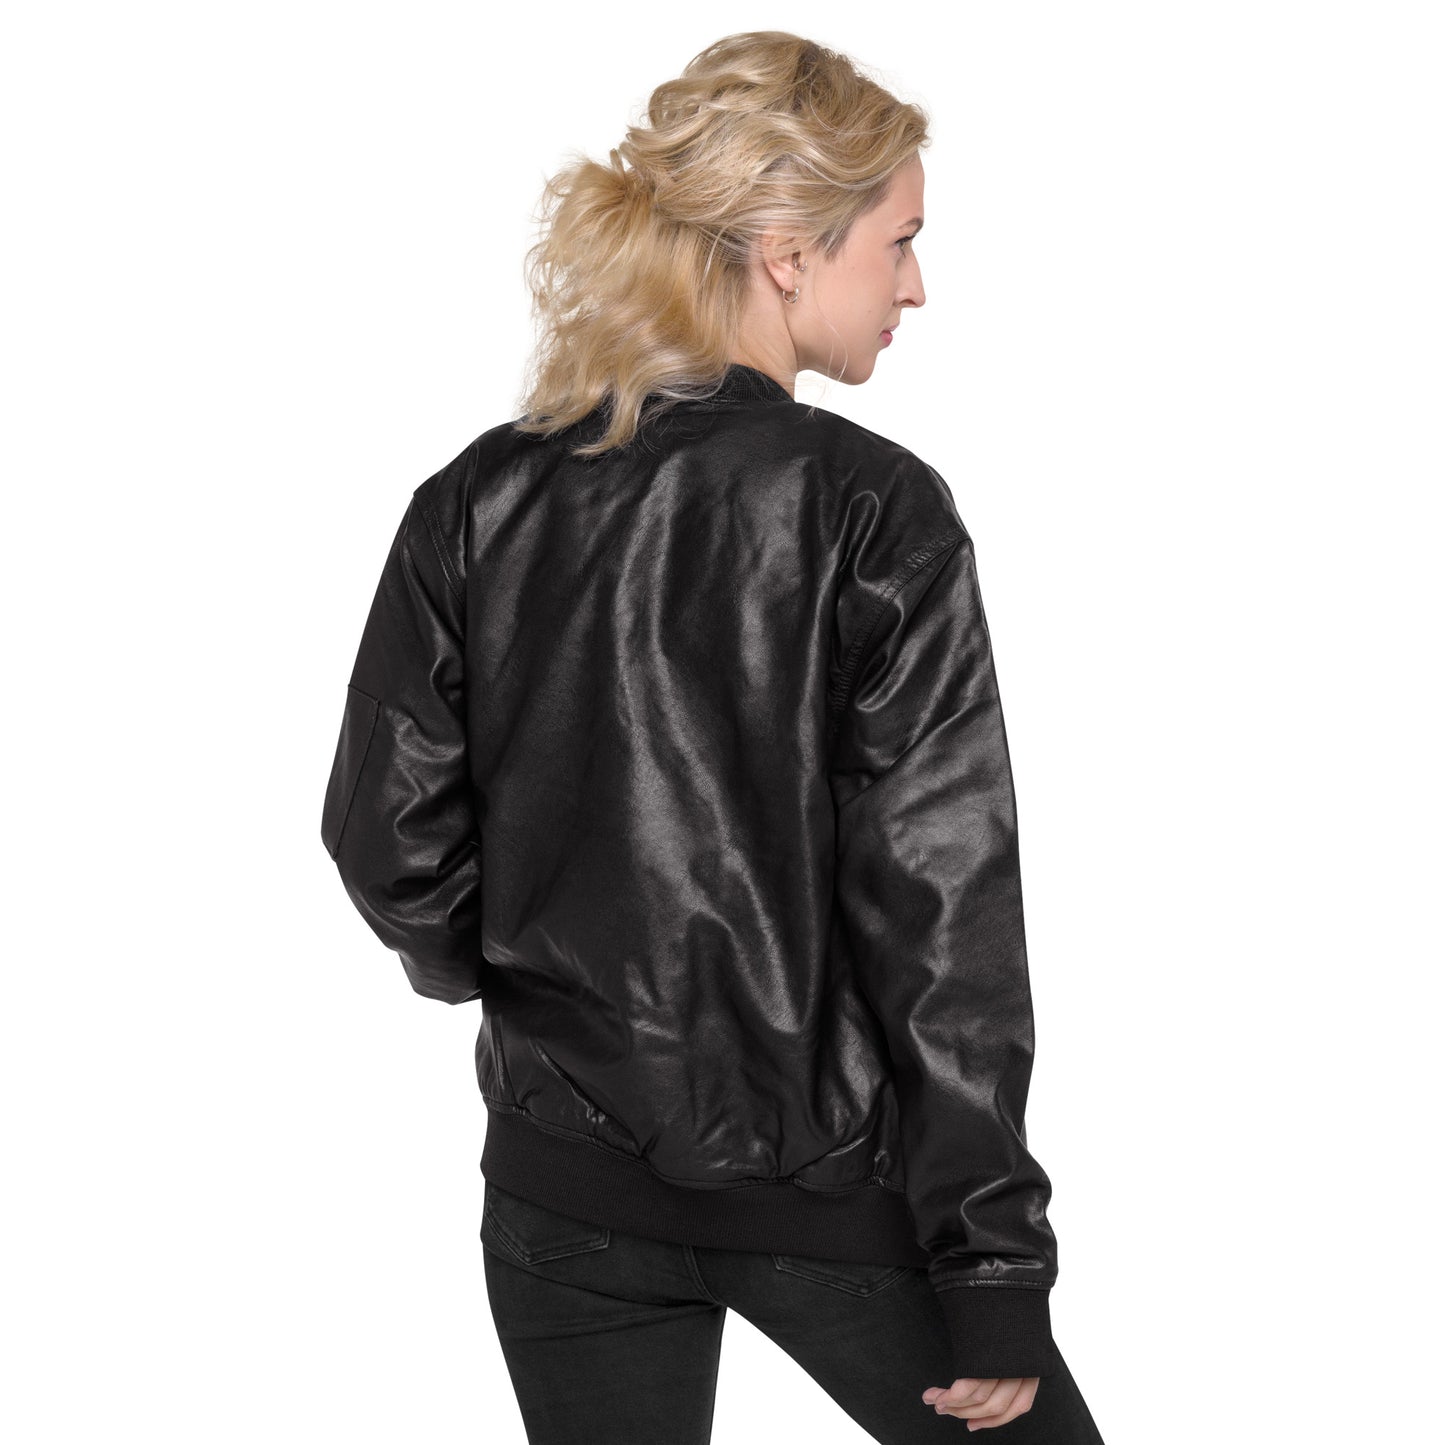 Leather Bomber Jacket - Everyone loves a shortgirl